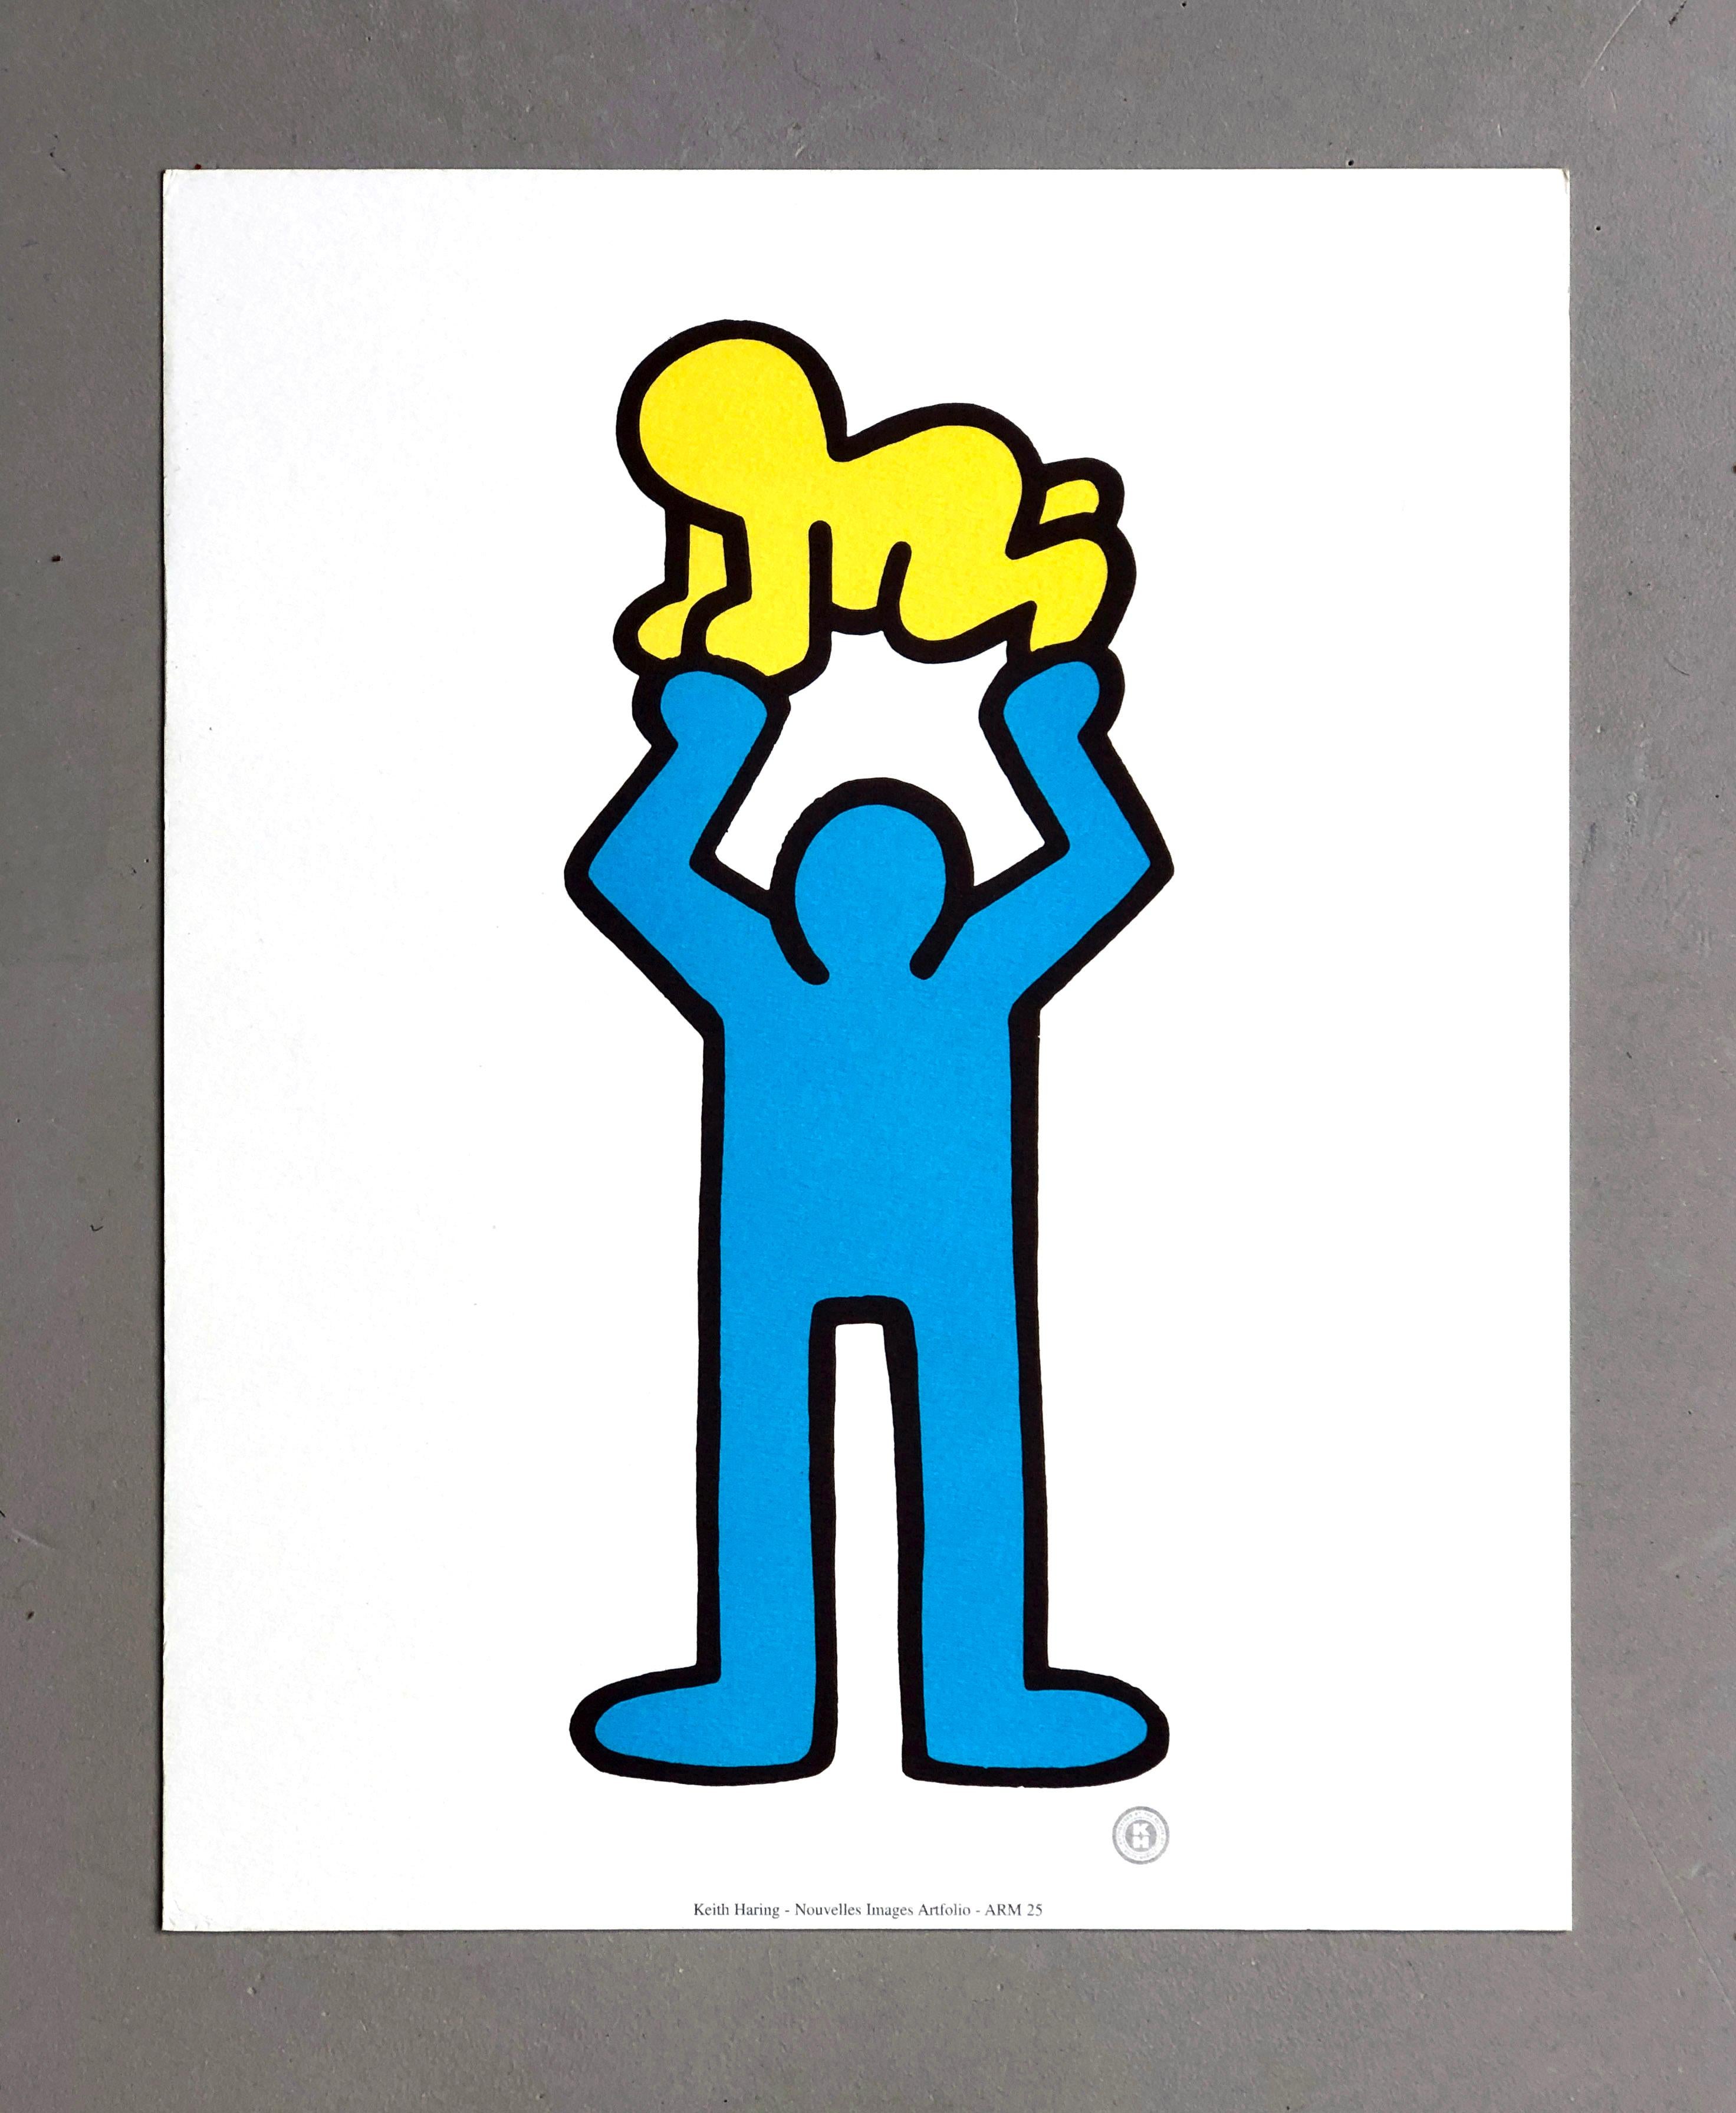 Keith Haring 1992 Pop Art - Art offset print on thick art paper, Man Holding Radiant Baby

Keith Haring (New York, 1958-1990), French 1992 pop art - Art offset print, untitled, depicting a blue figure raising a yellow infant or 